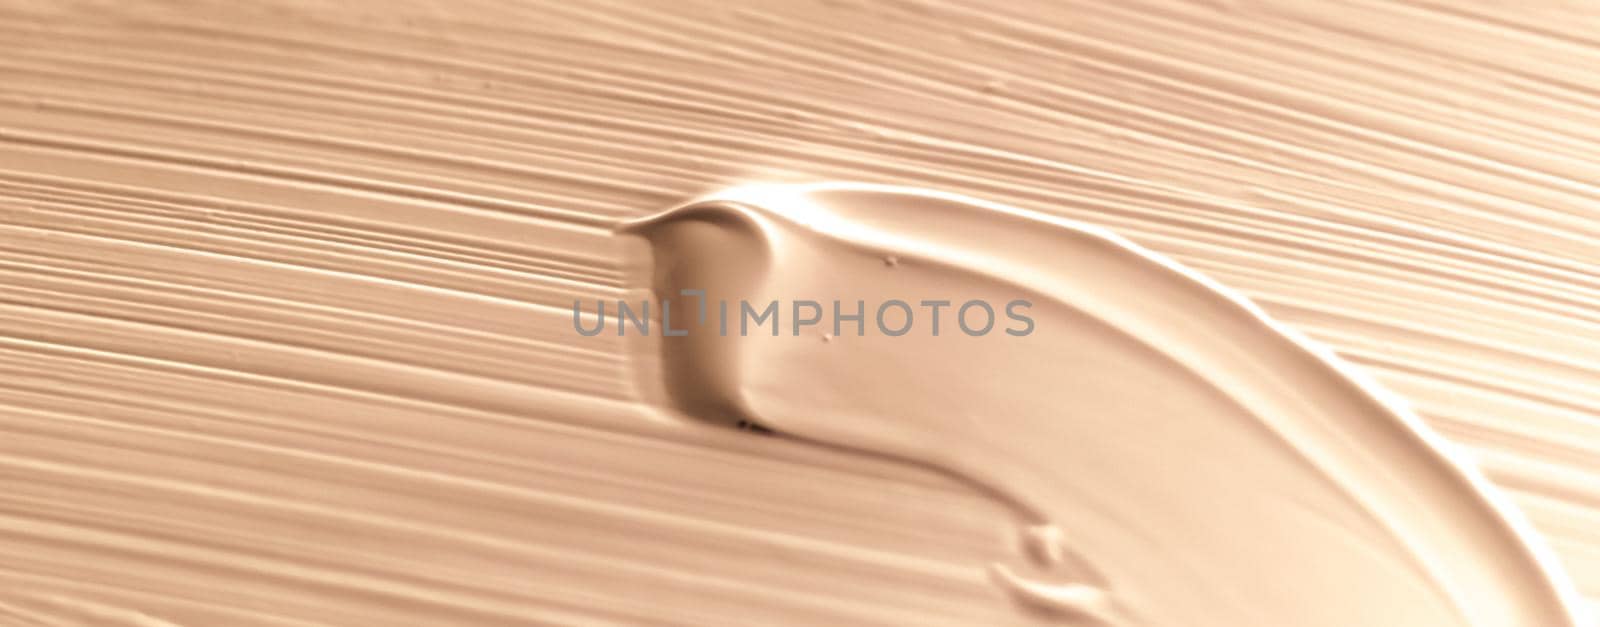 Cosmetics abstract texture background, beige acrylic paint brush stroke, textured cream product as make-up backdrop for luxury beauty brand, holiday banner design by Anneleven